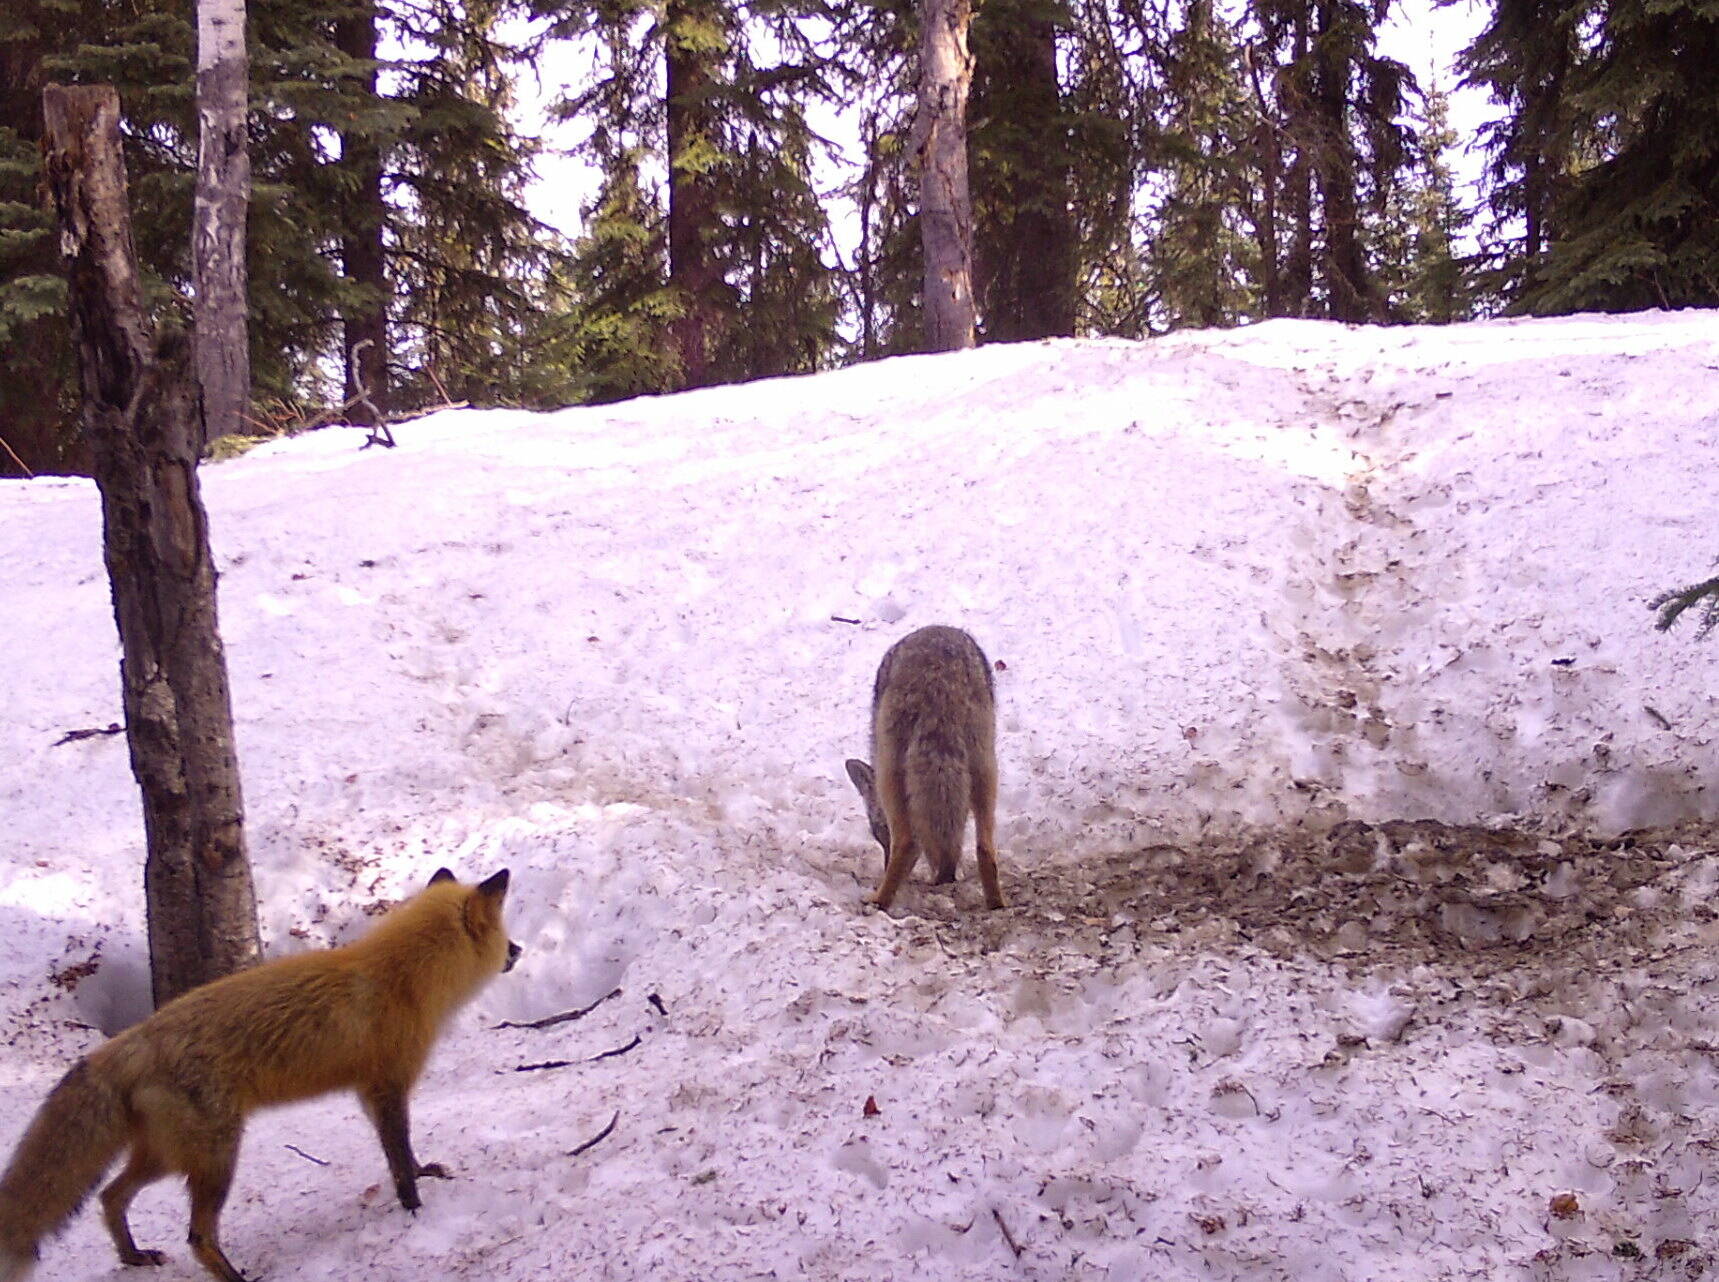 A red fox encounters a coyote that is examining its den site in Interior Alaska. (Photo by Ned Rozell)